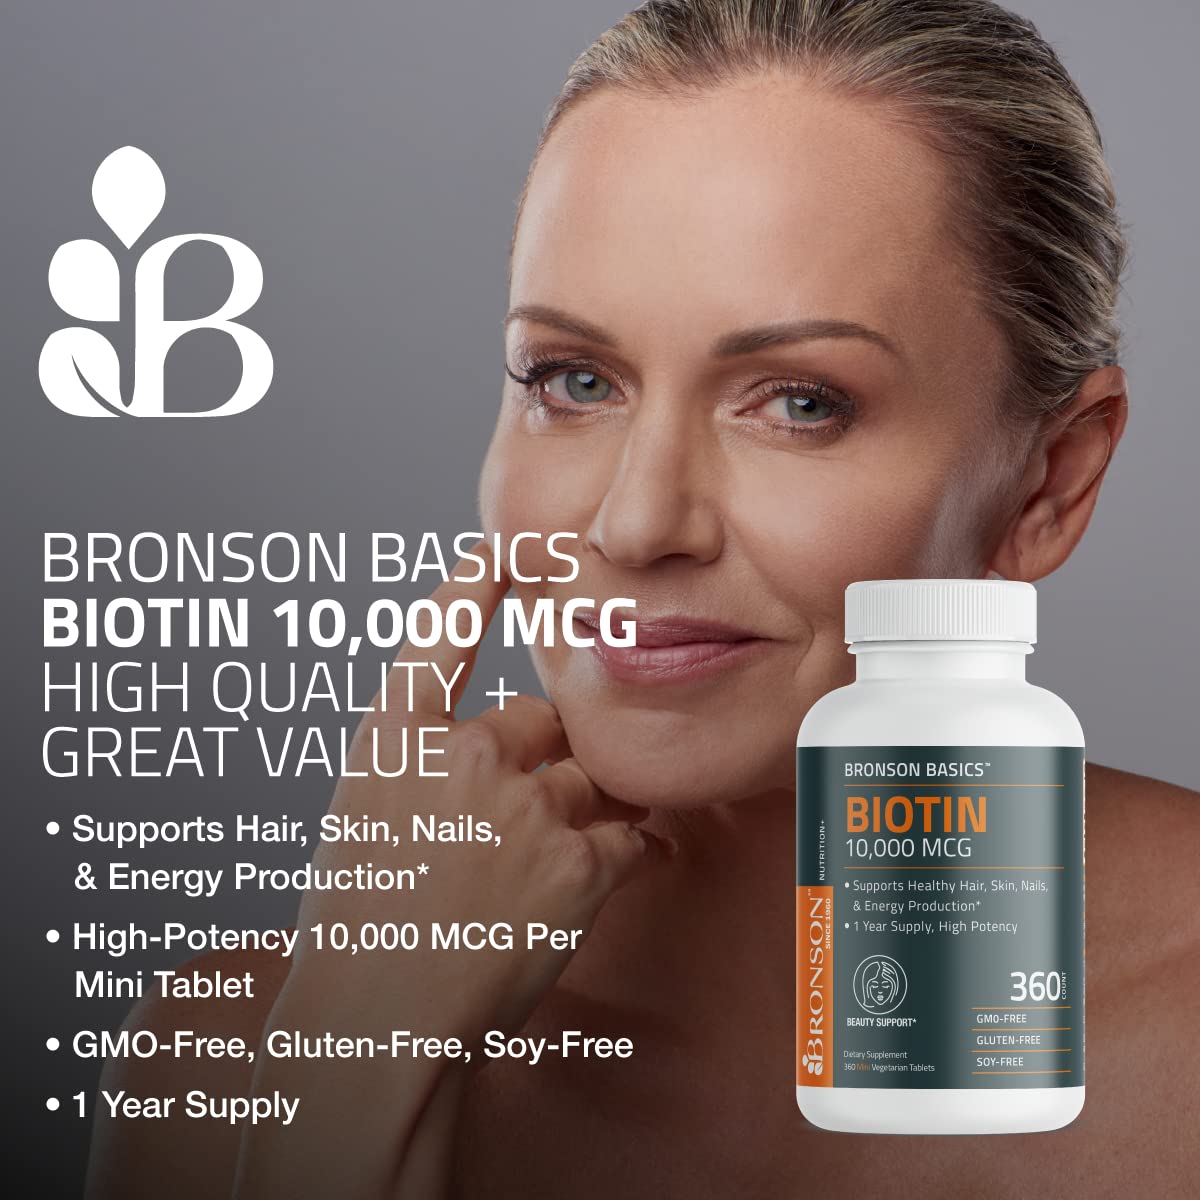 Bronson Biotin 10,000 MCG Supports Healthy Hair, Skin & Nails & Energy Production - High Potency Beauty Support - Non-GMO, 360 Vegetarian Tablets